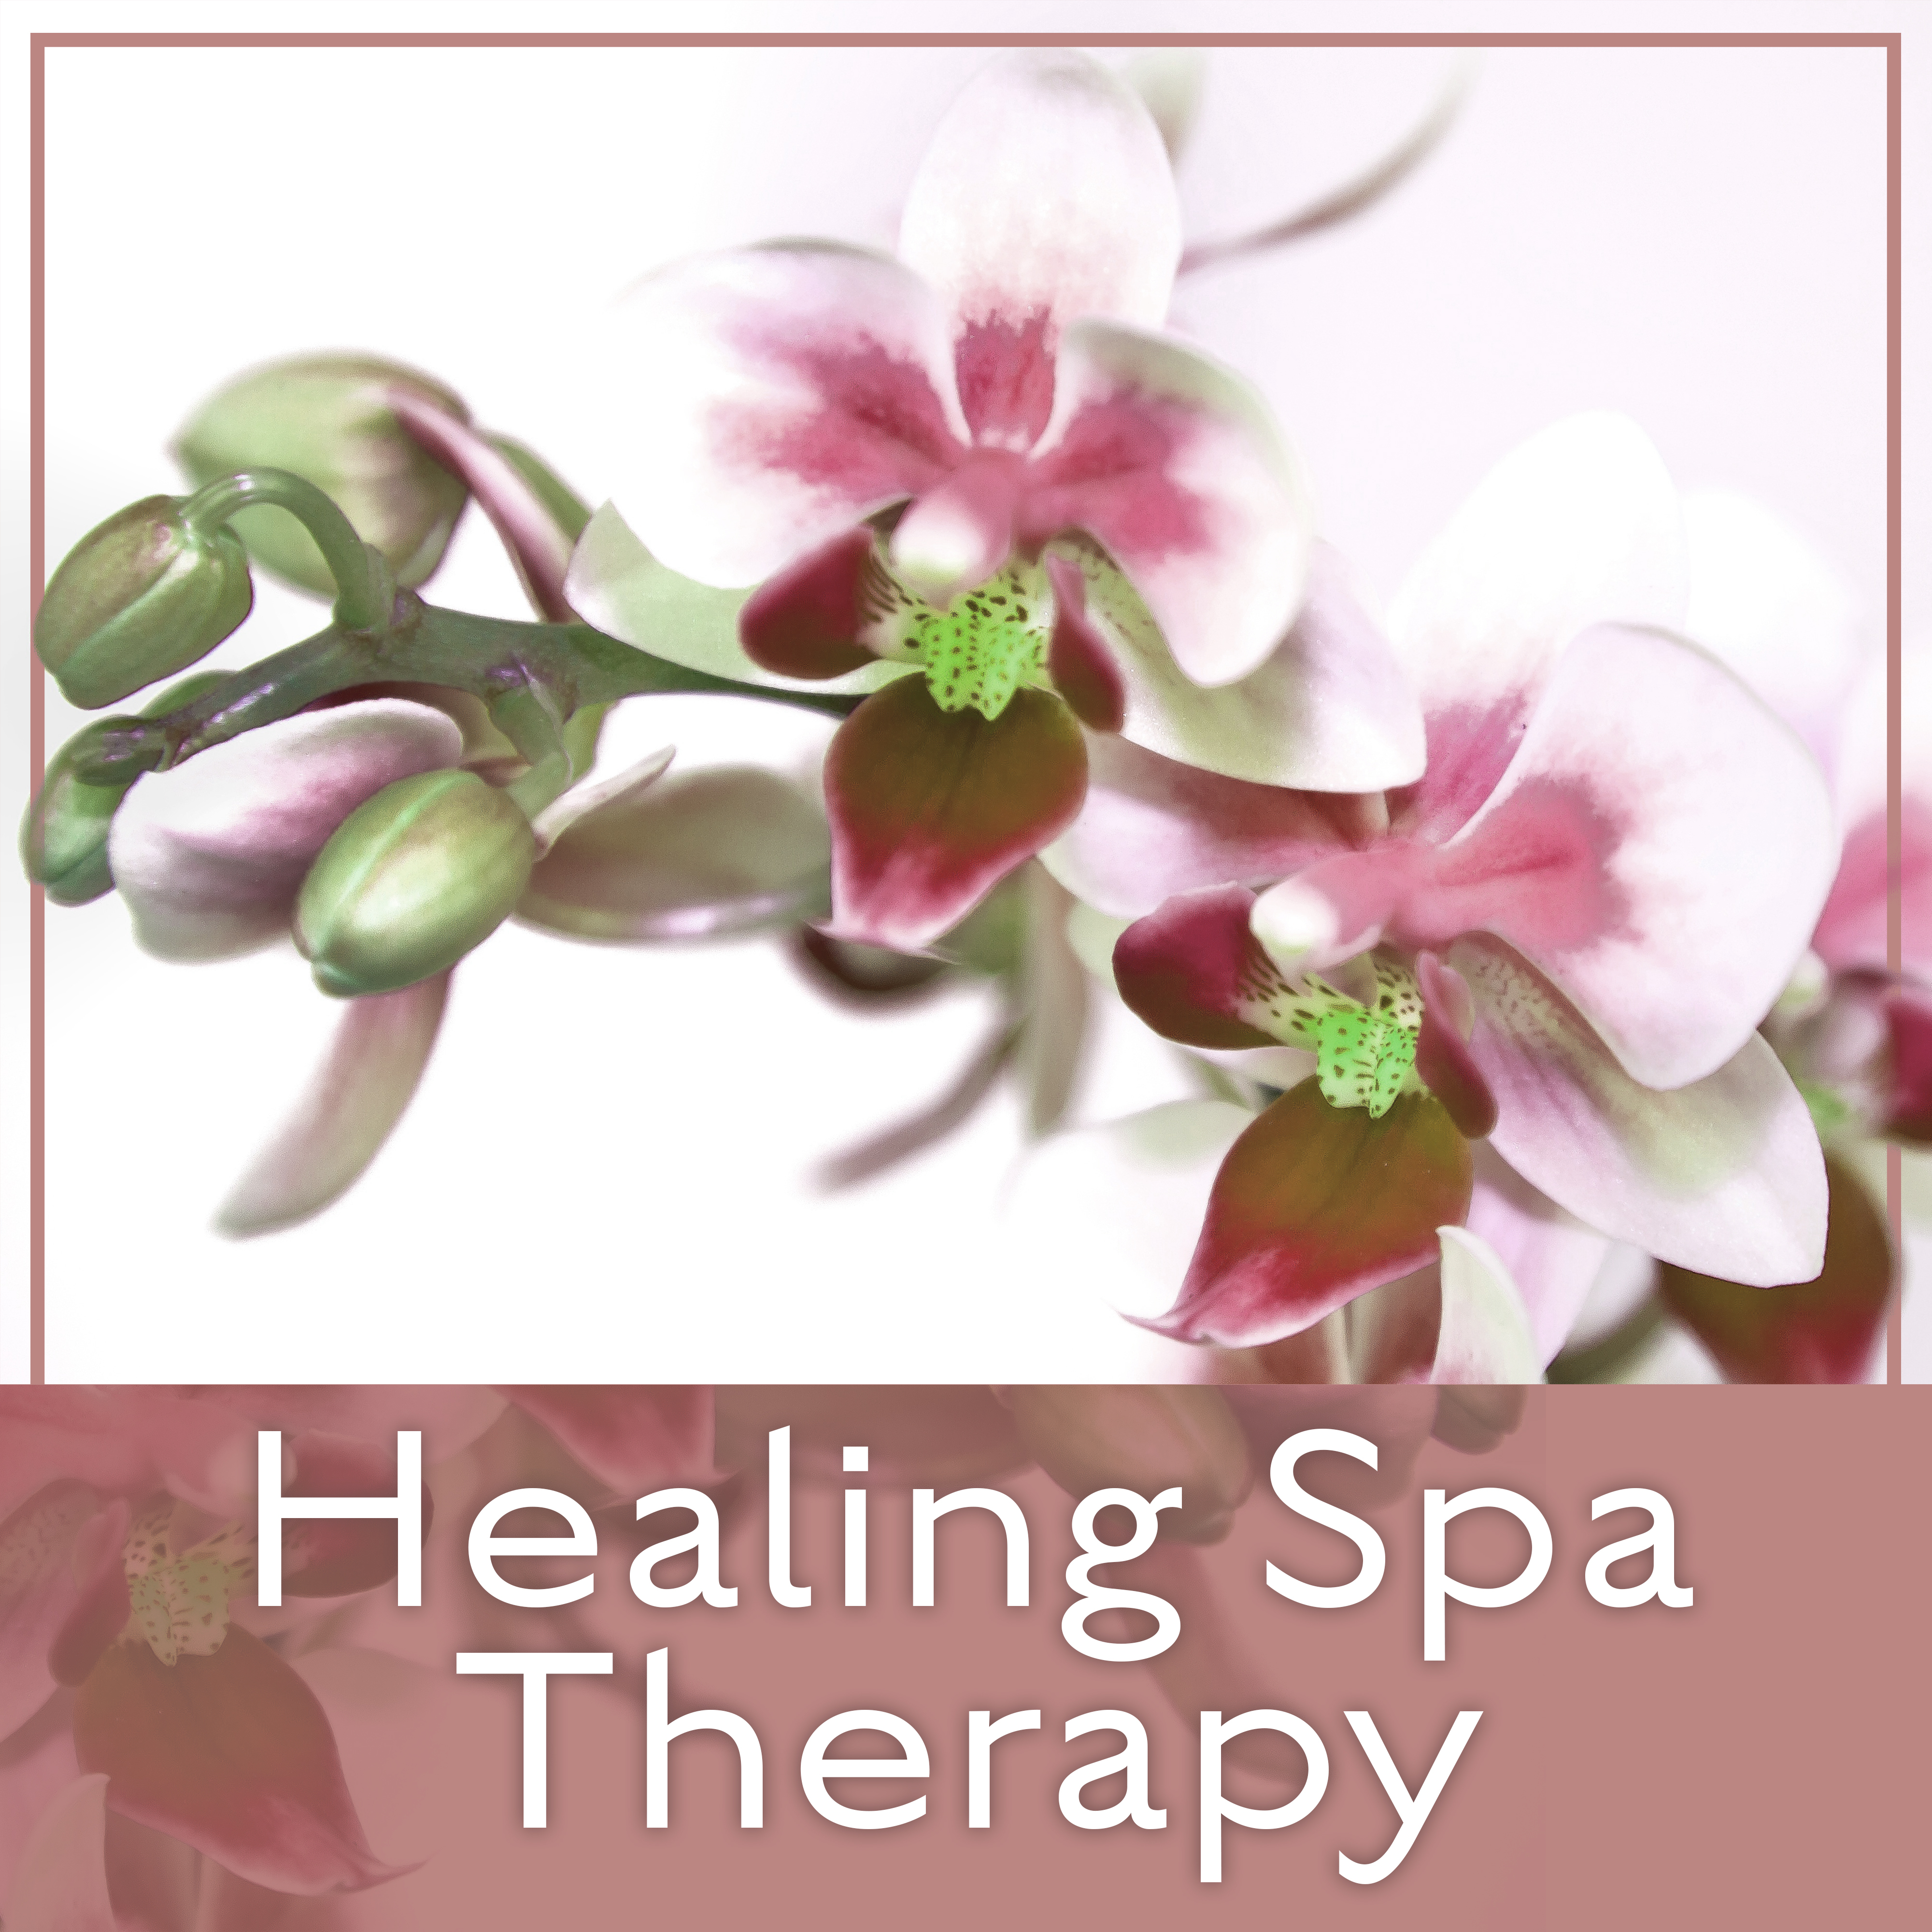 Healing Spa Therapy – New age Sounds for Deep Relaxation,  Spa, Massage, Beauty Parlour Music